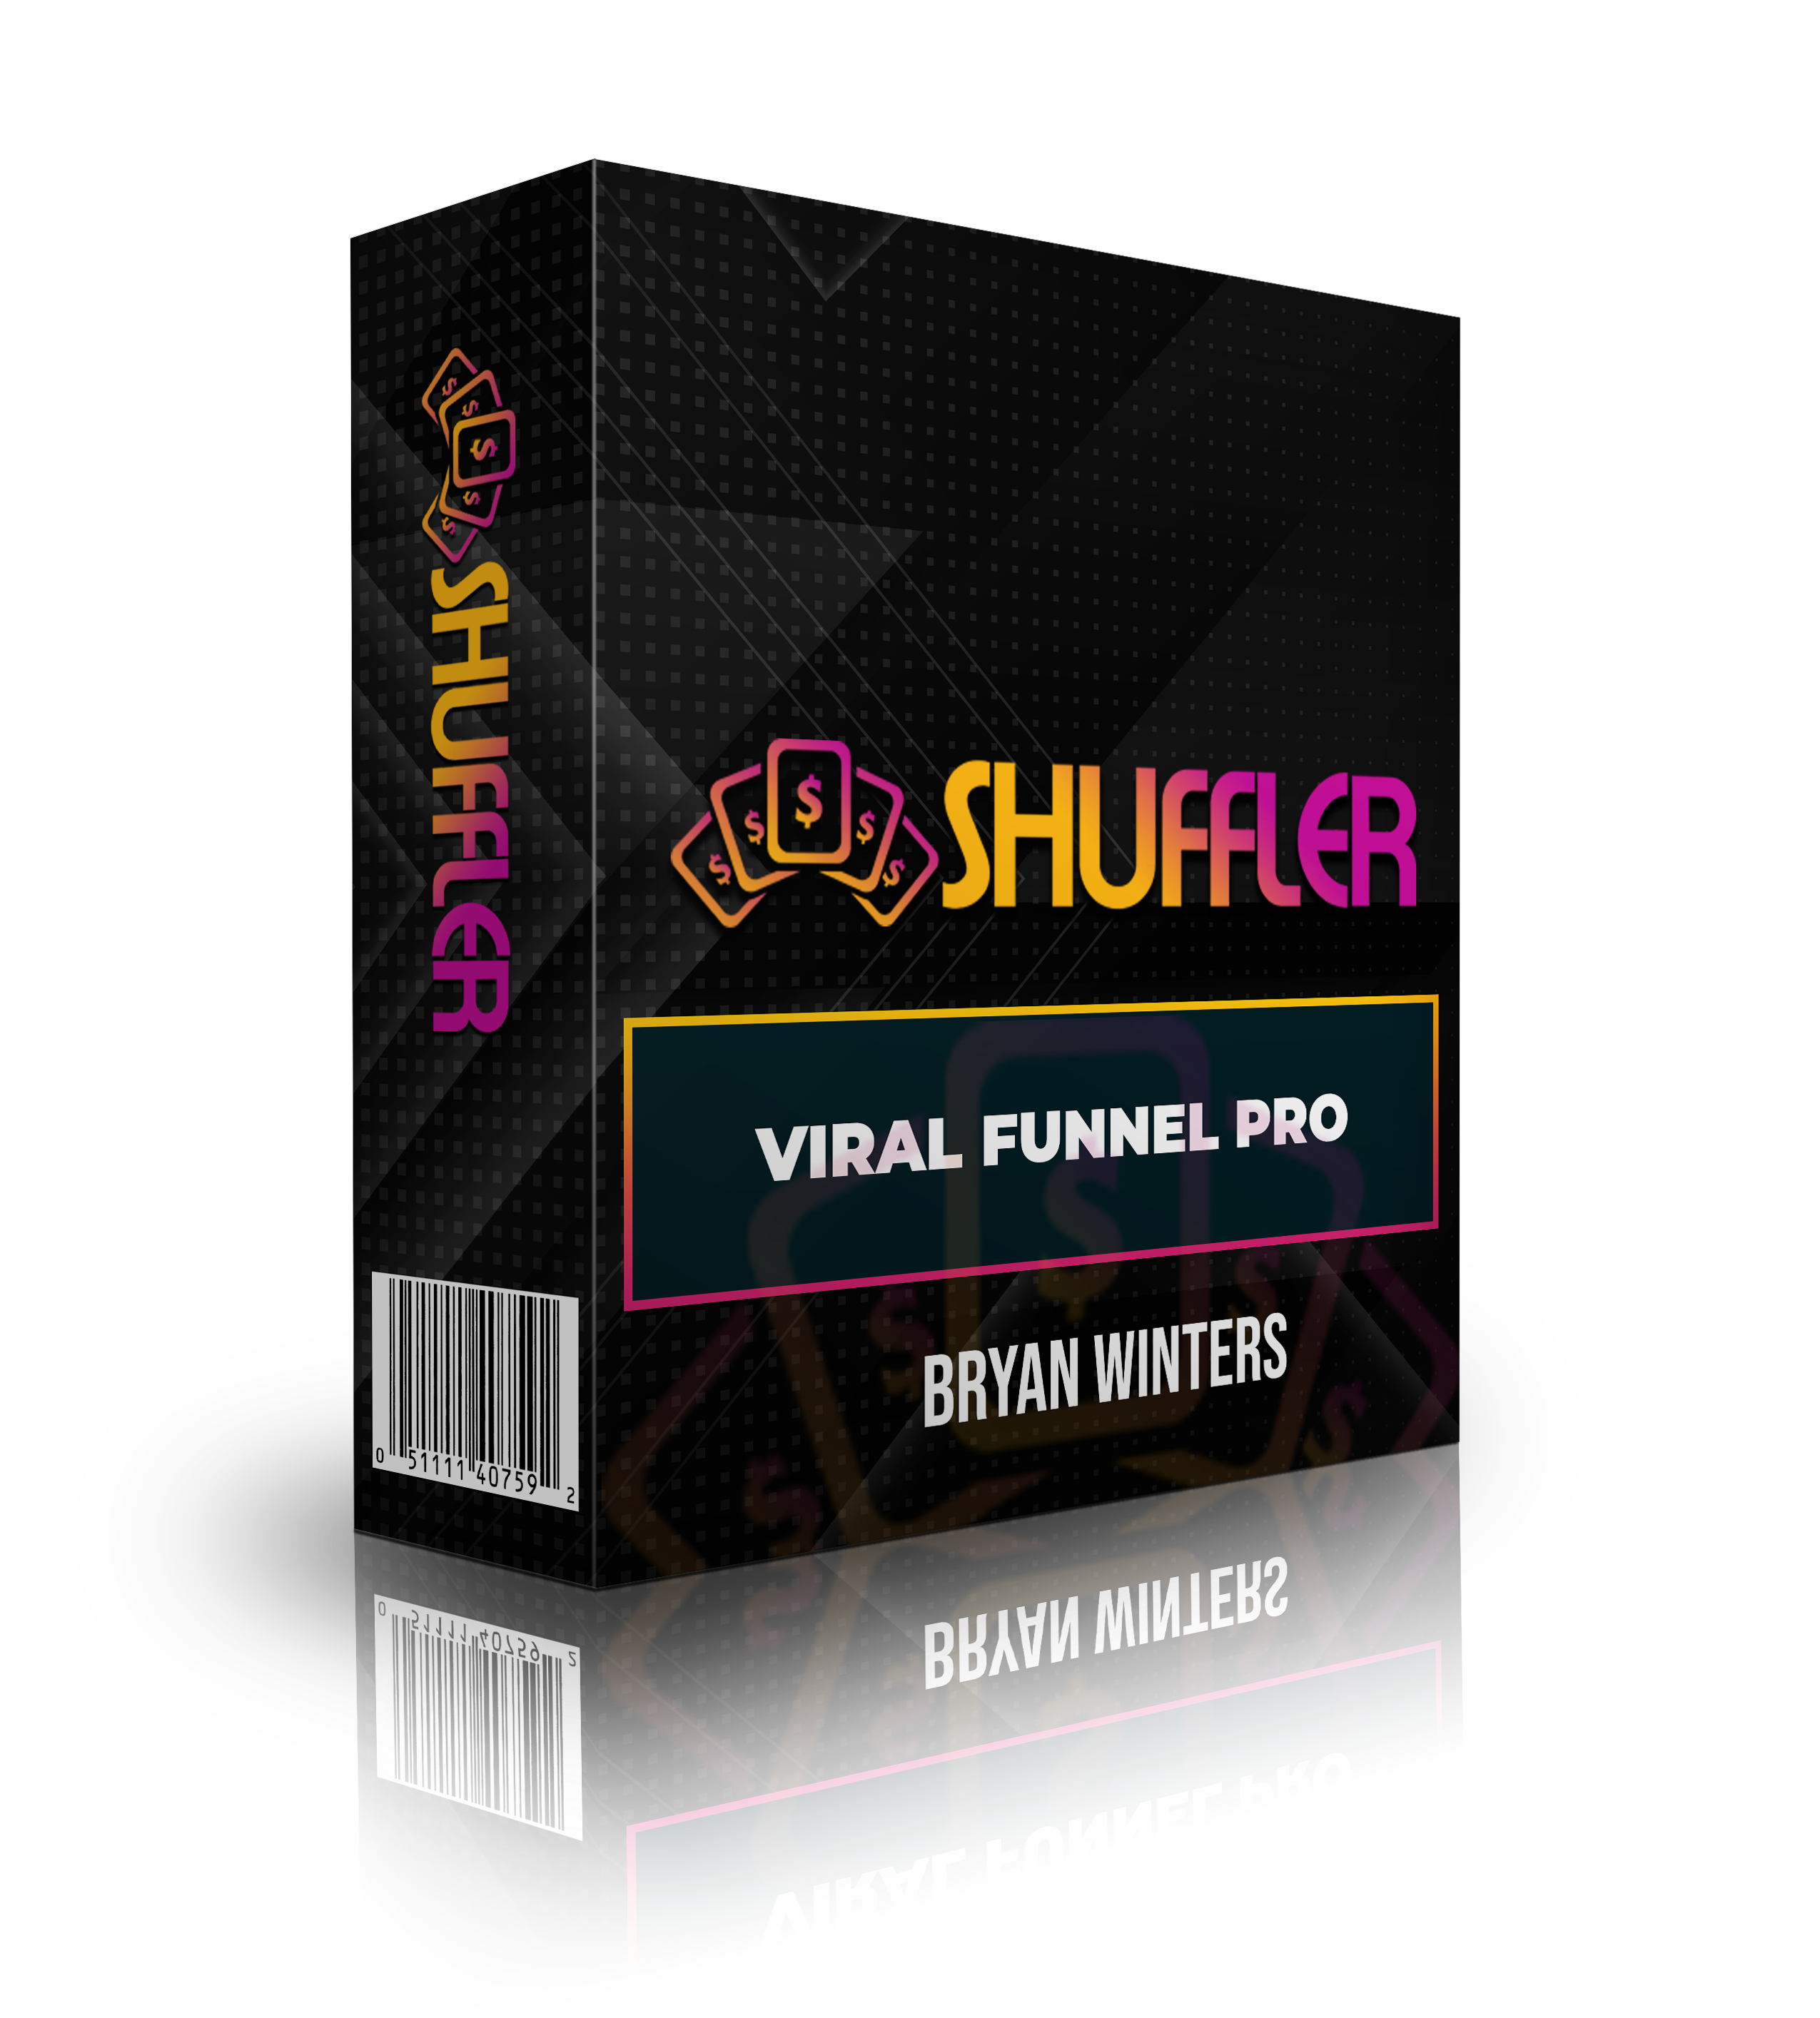 OTO 2 - SHUFFLER'S VIRAL FUNNEL PRO - $67 With $37 Downsell. SHUFFLER'S front end app enables users to "shuffle and choose" up to 20 viral funnels... "Viral Funnel Pro" unlocks unlimited SHUFFLER funnels, giving users access to more funnels than they could ever use in literally a hundred lifetimes (with over 52 billion funnels to choose from).